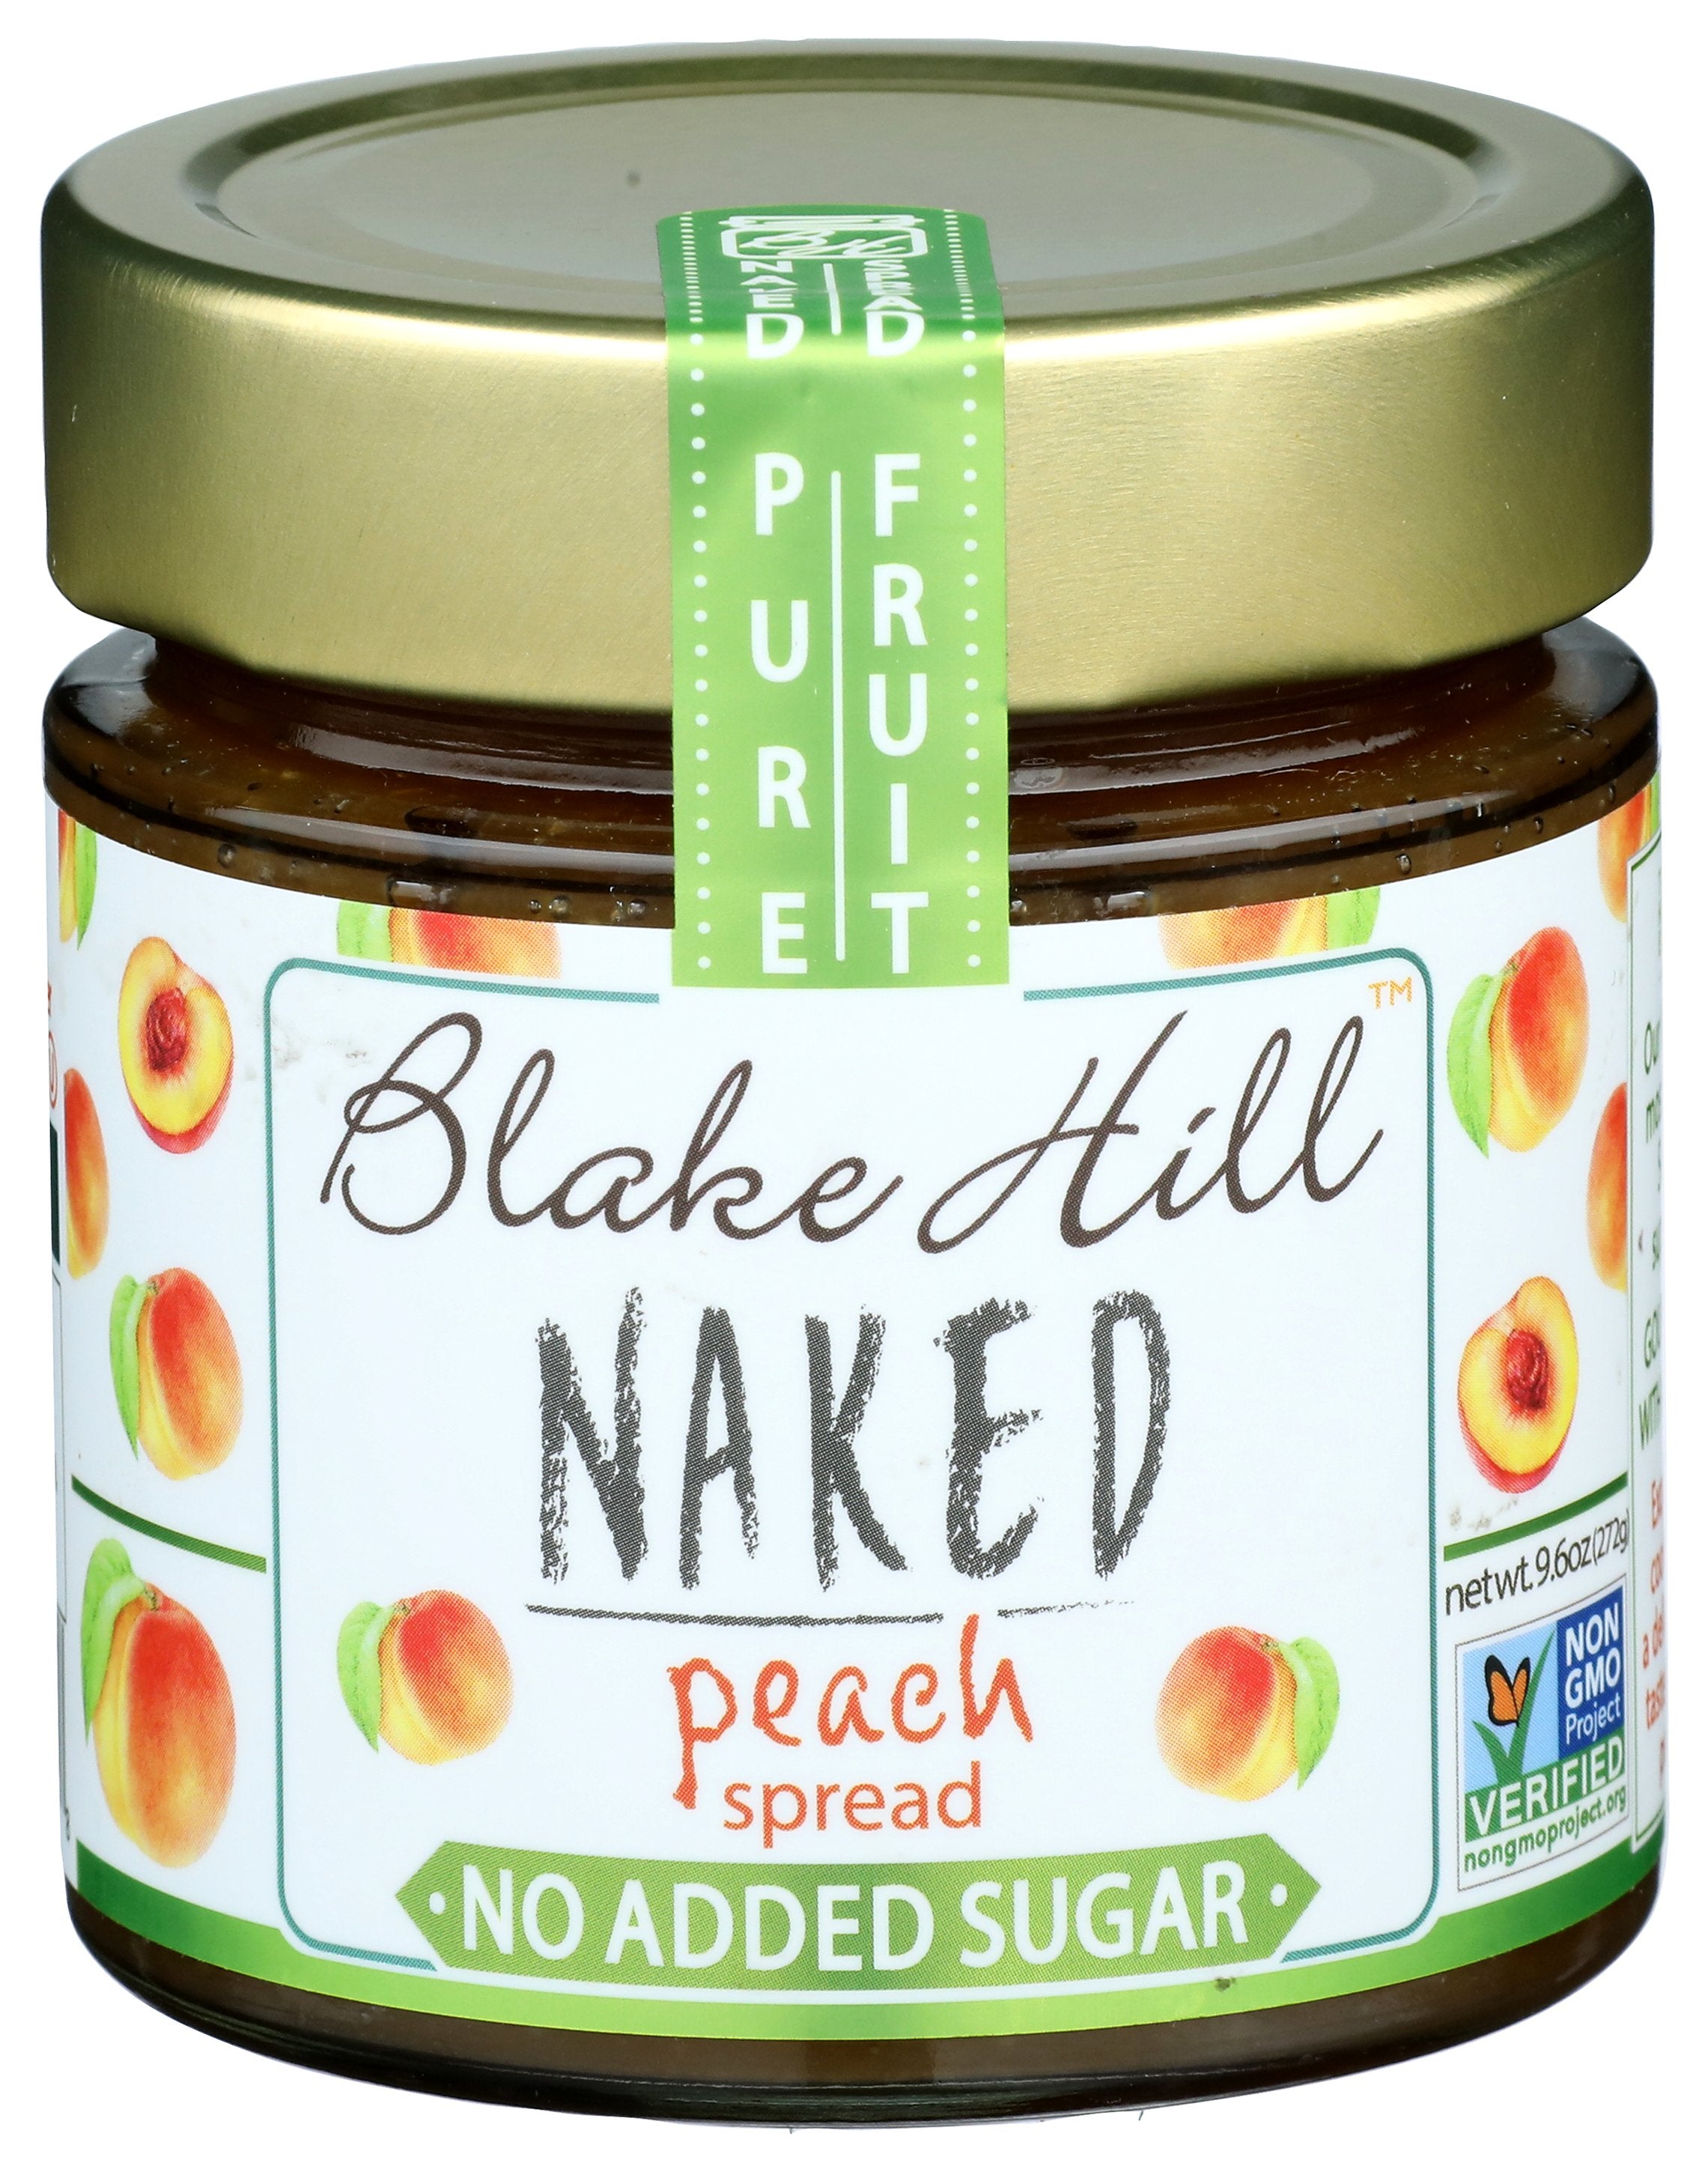 BLAKE HILL SPREAD NAKED PEACH NSA - Case of 6